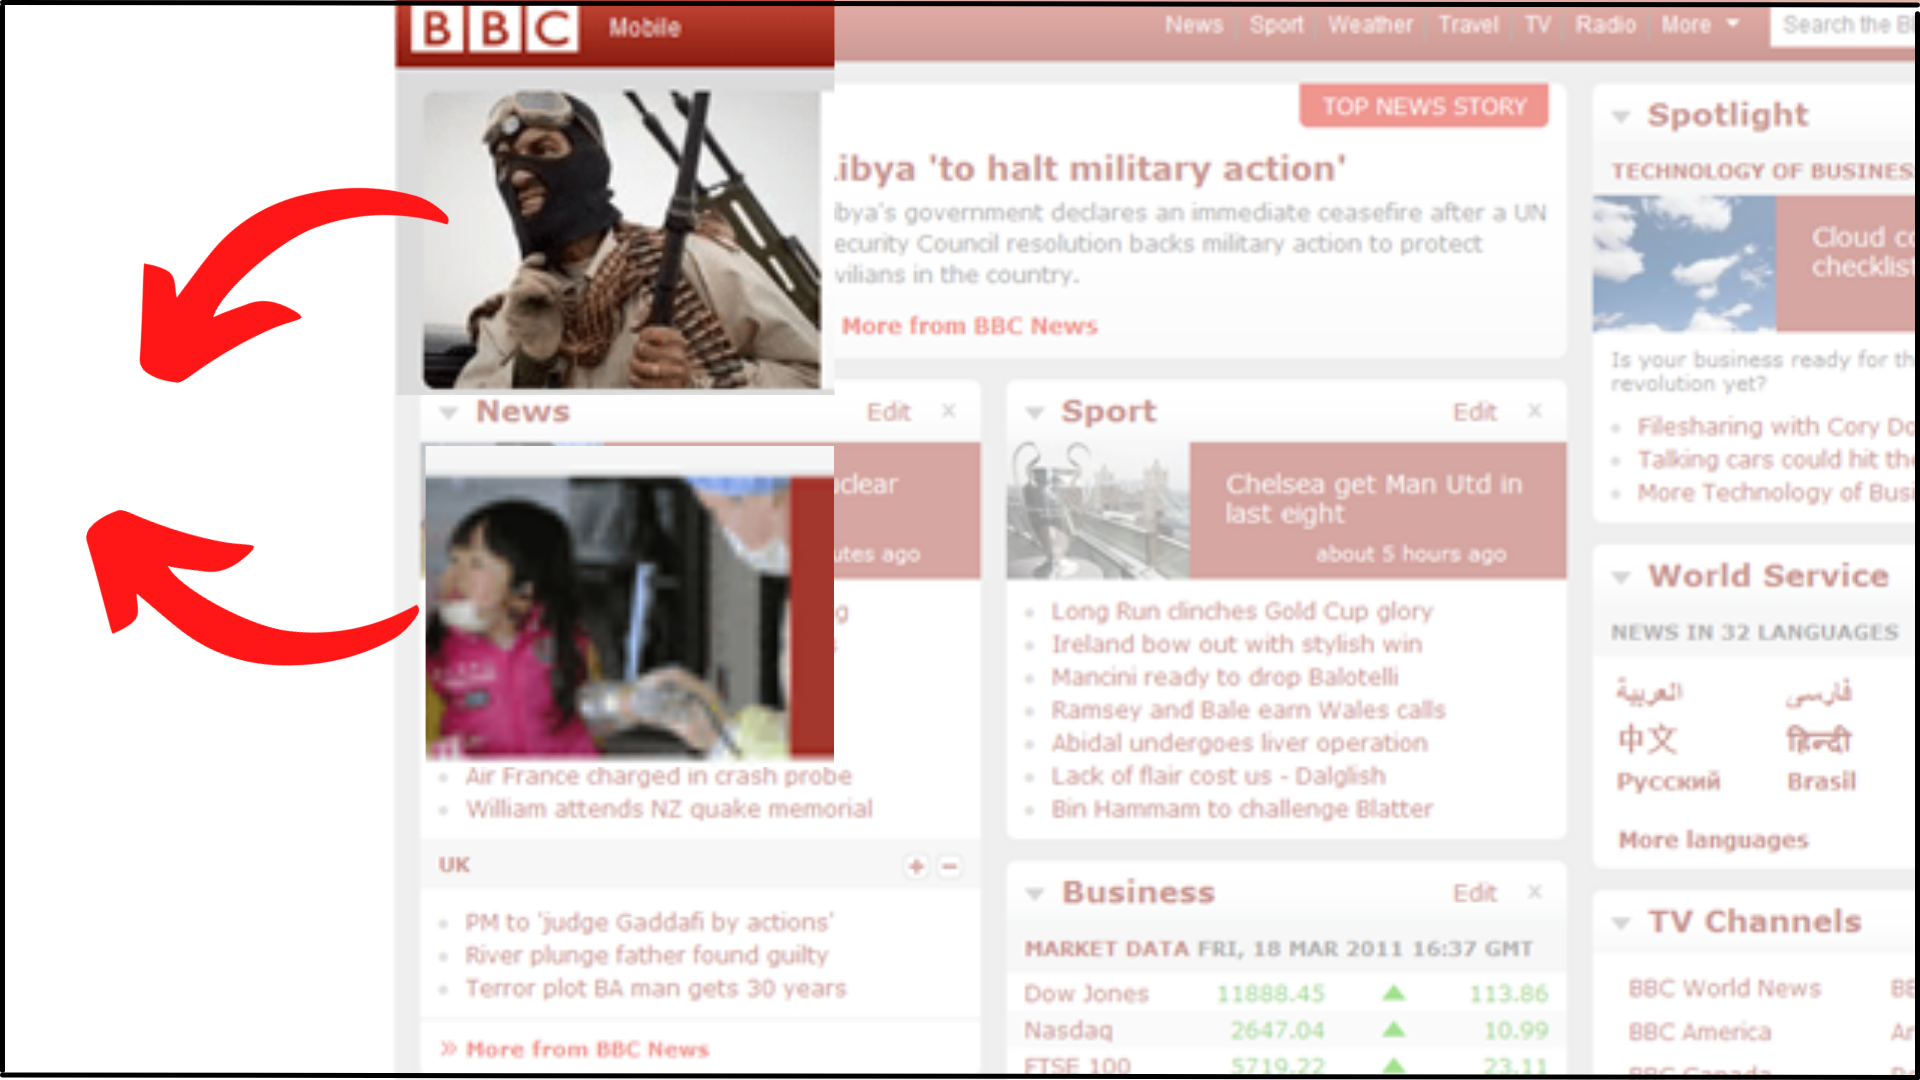 bbc-edited-example-images-figures-looking-away-from-content